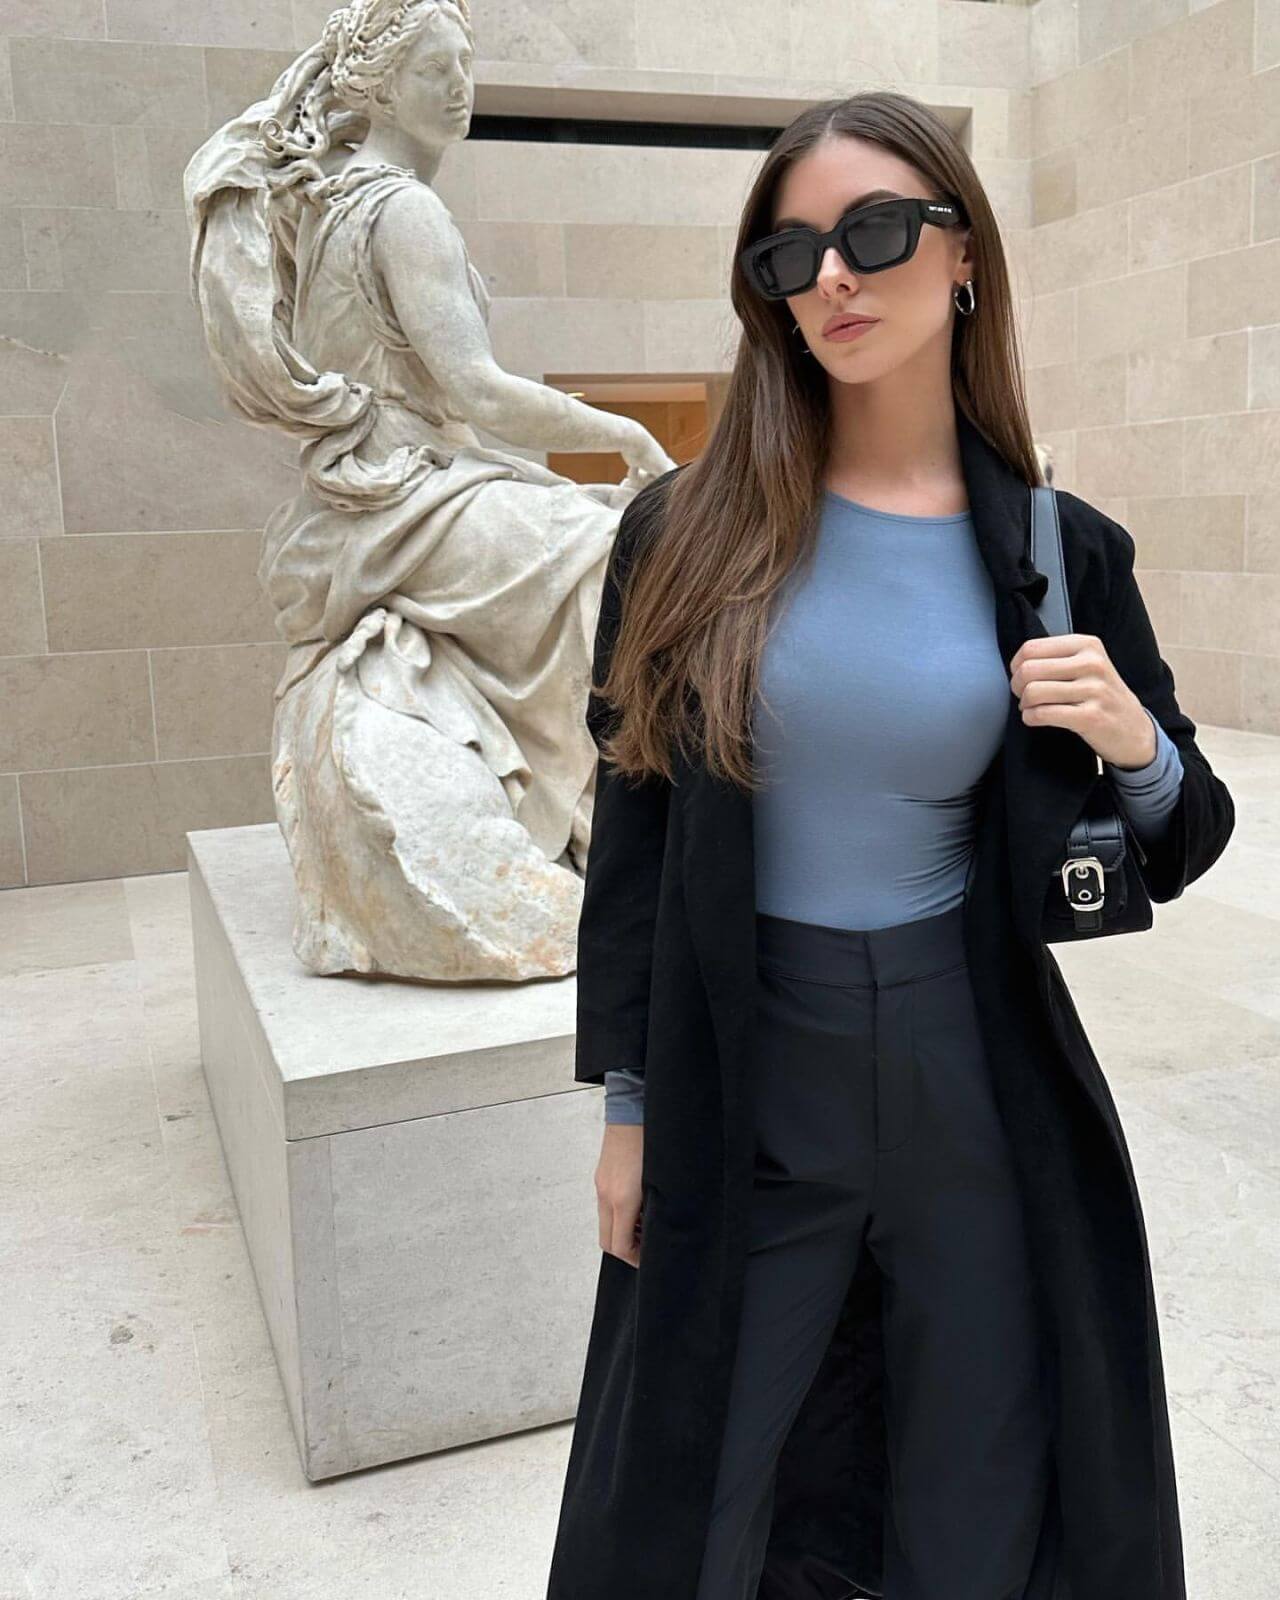 Carmella Rose Perfect Looks In Black Long Jacket With Blue T-shirt & Pants